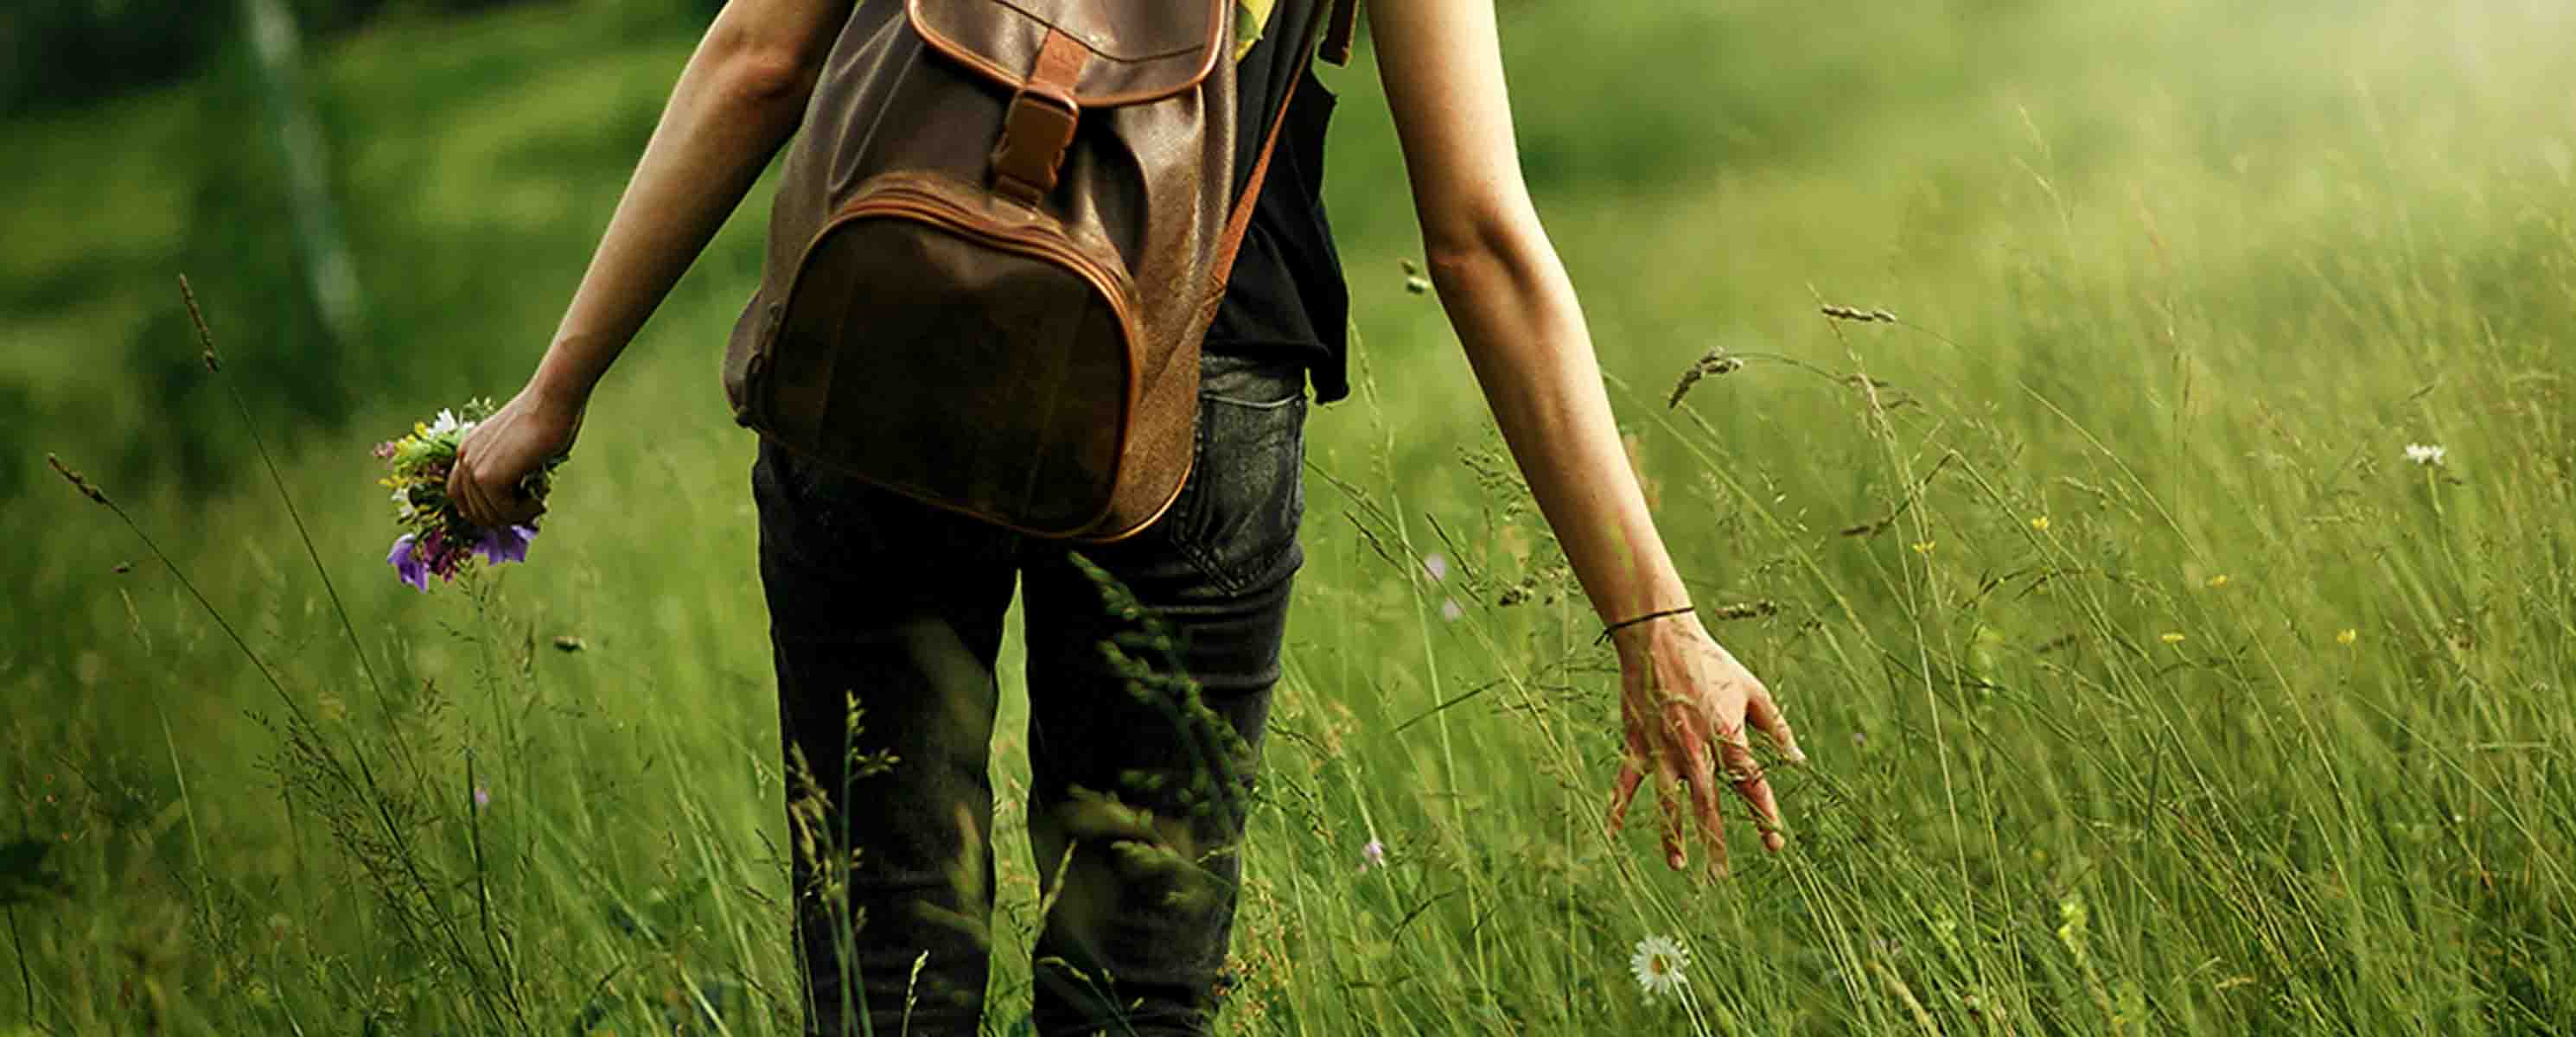 Woman walking through a field of long grass and wild flowers